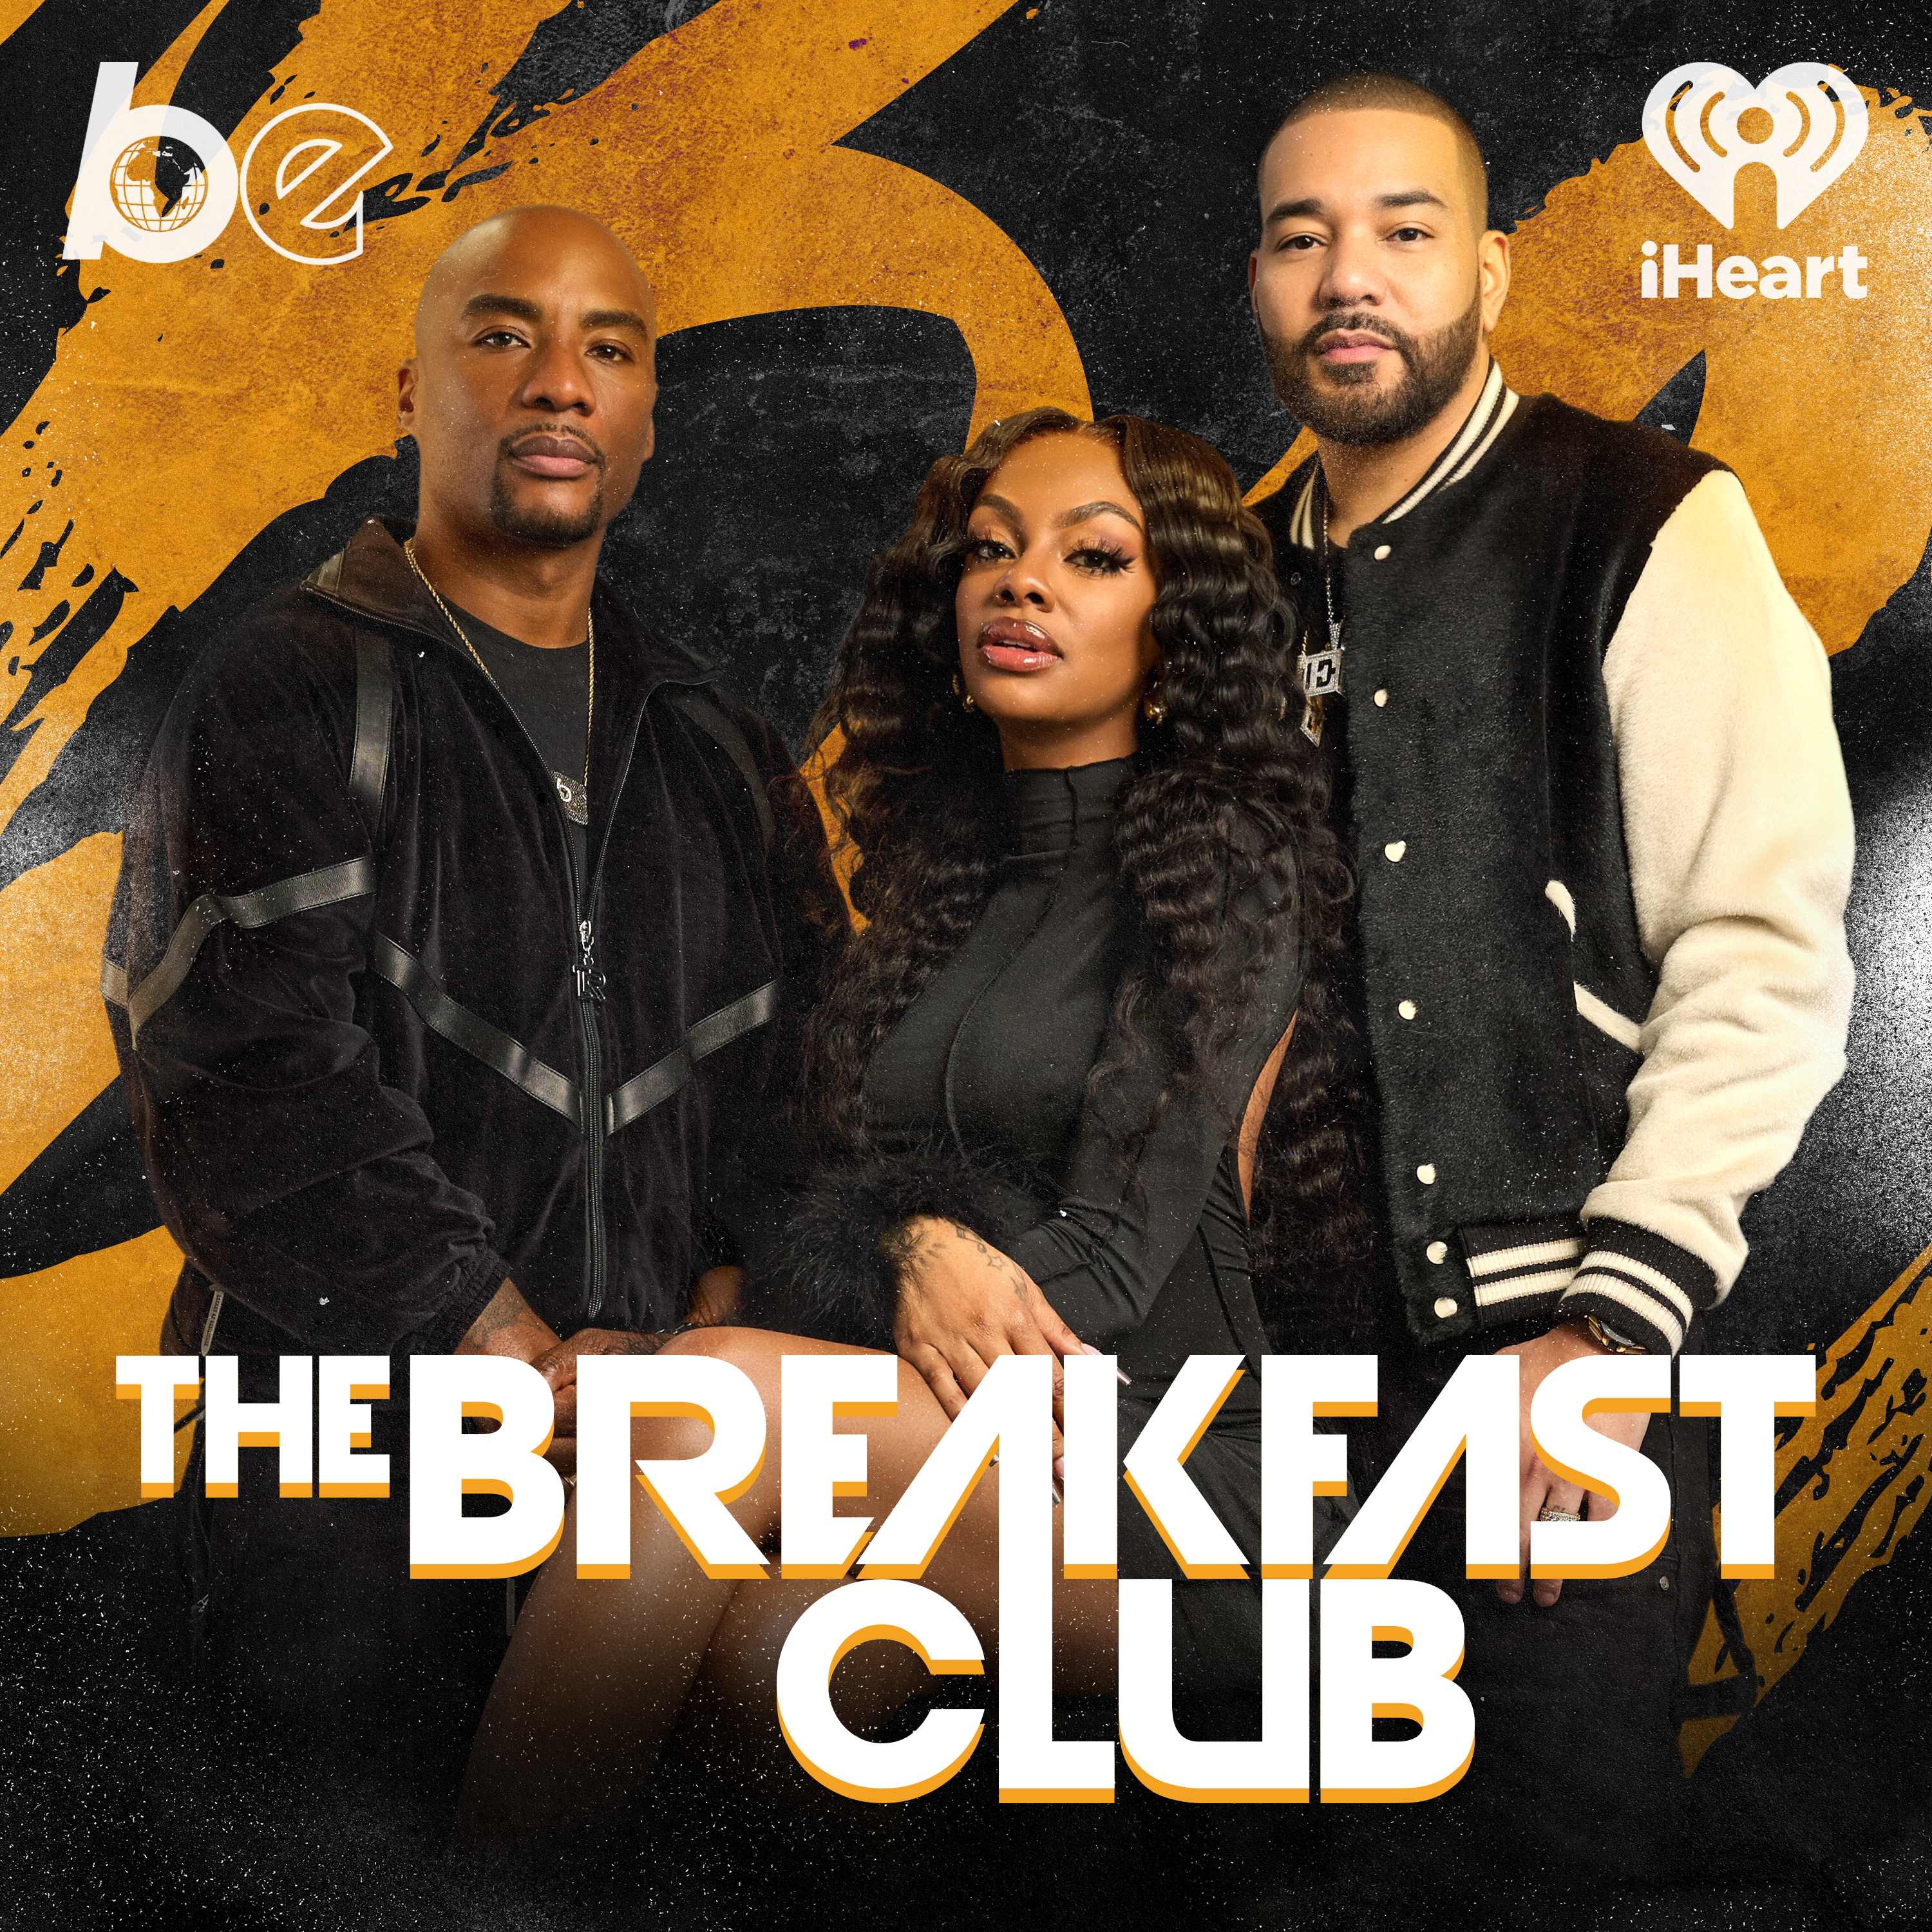 Full Show: Jess Hilarious Announced As The New Co-Host Of The Breakfast Club, Shannon Sharpe Responds , Elon Musk First Human Patient Receives Neuralink, Jam Master Jay Murder Trial Begins+More